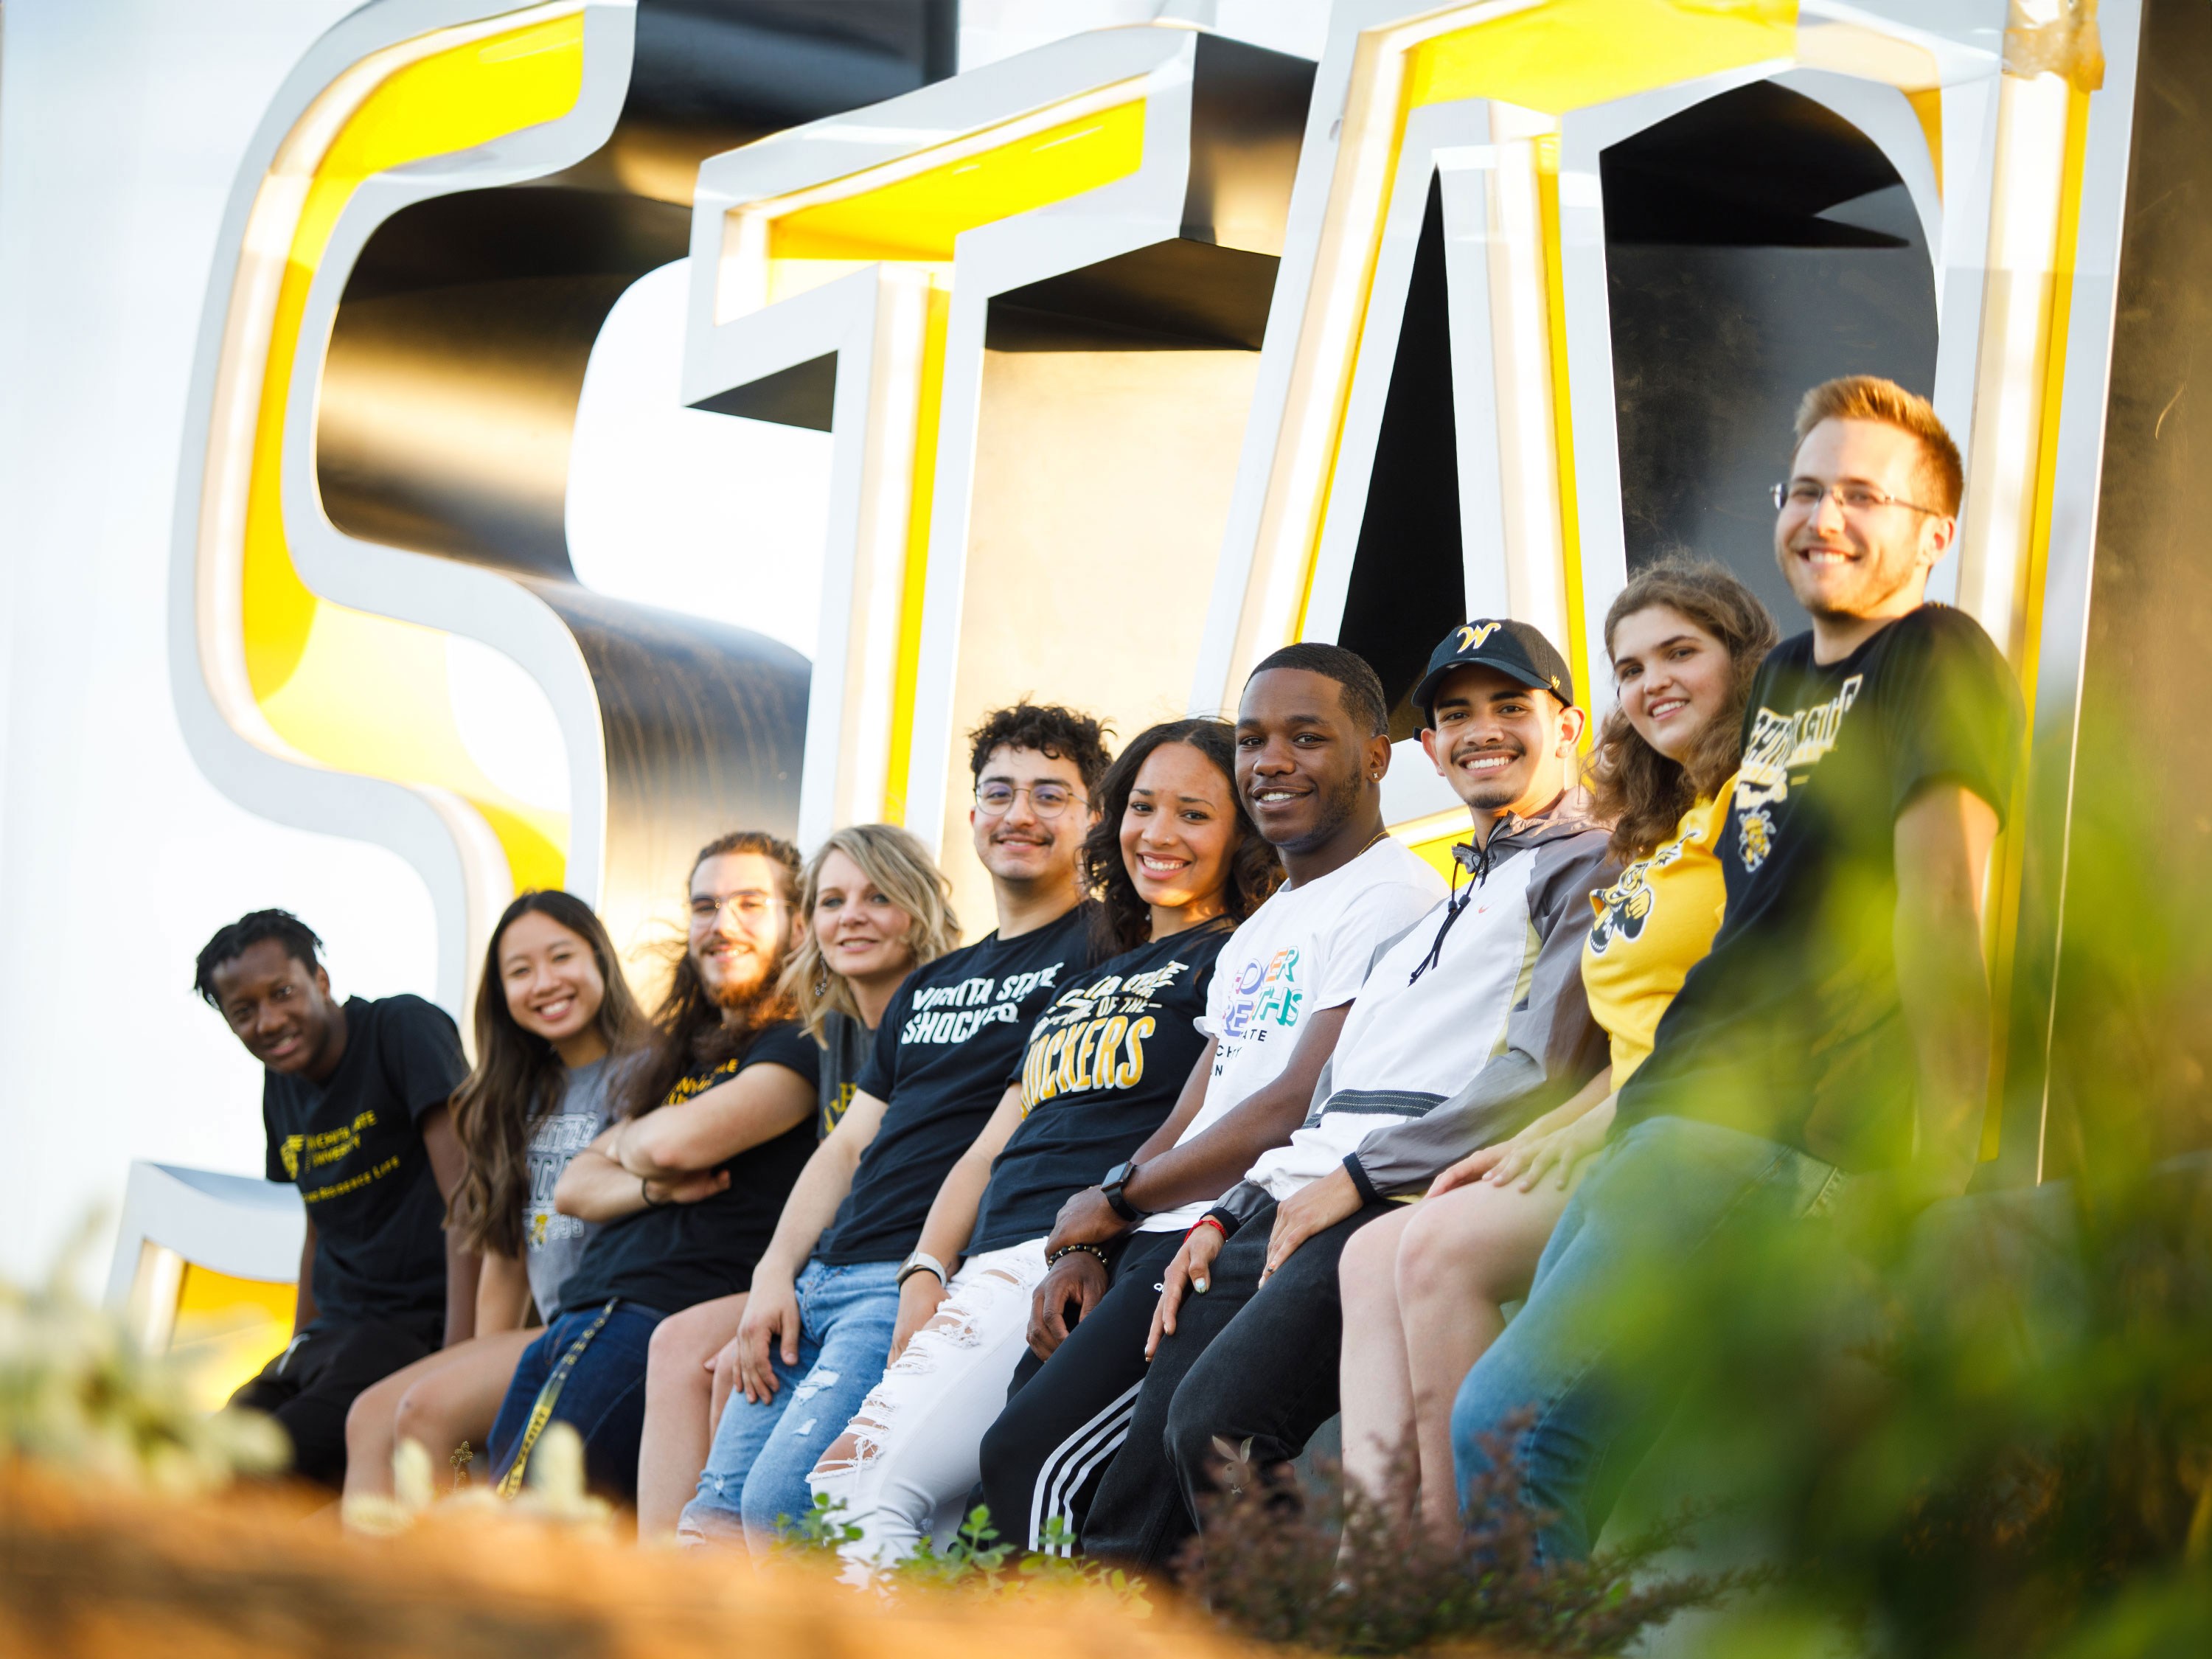 A group of students smiling together in front of the Wichita State sign.